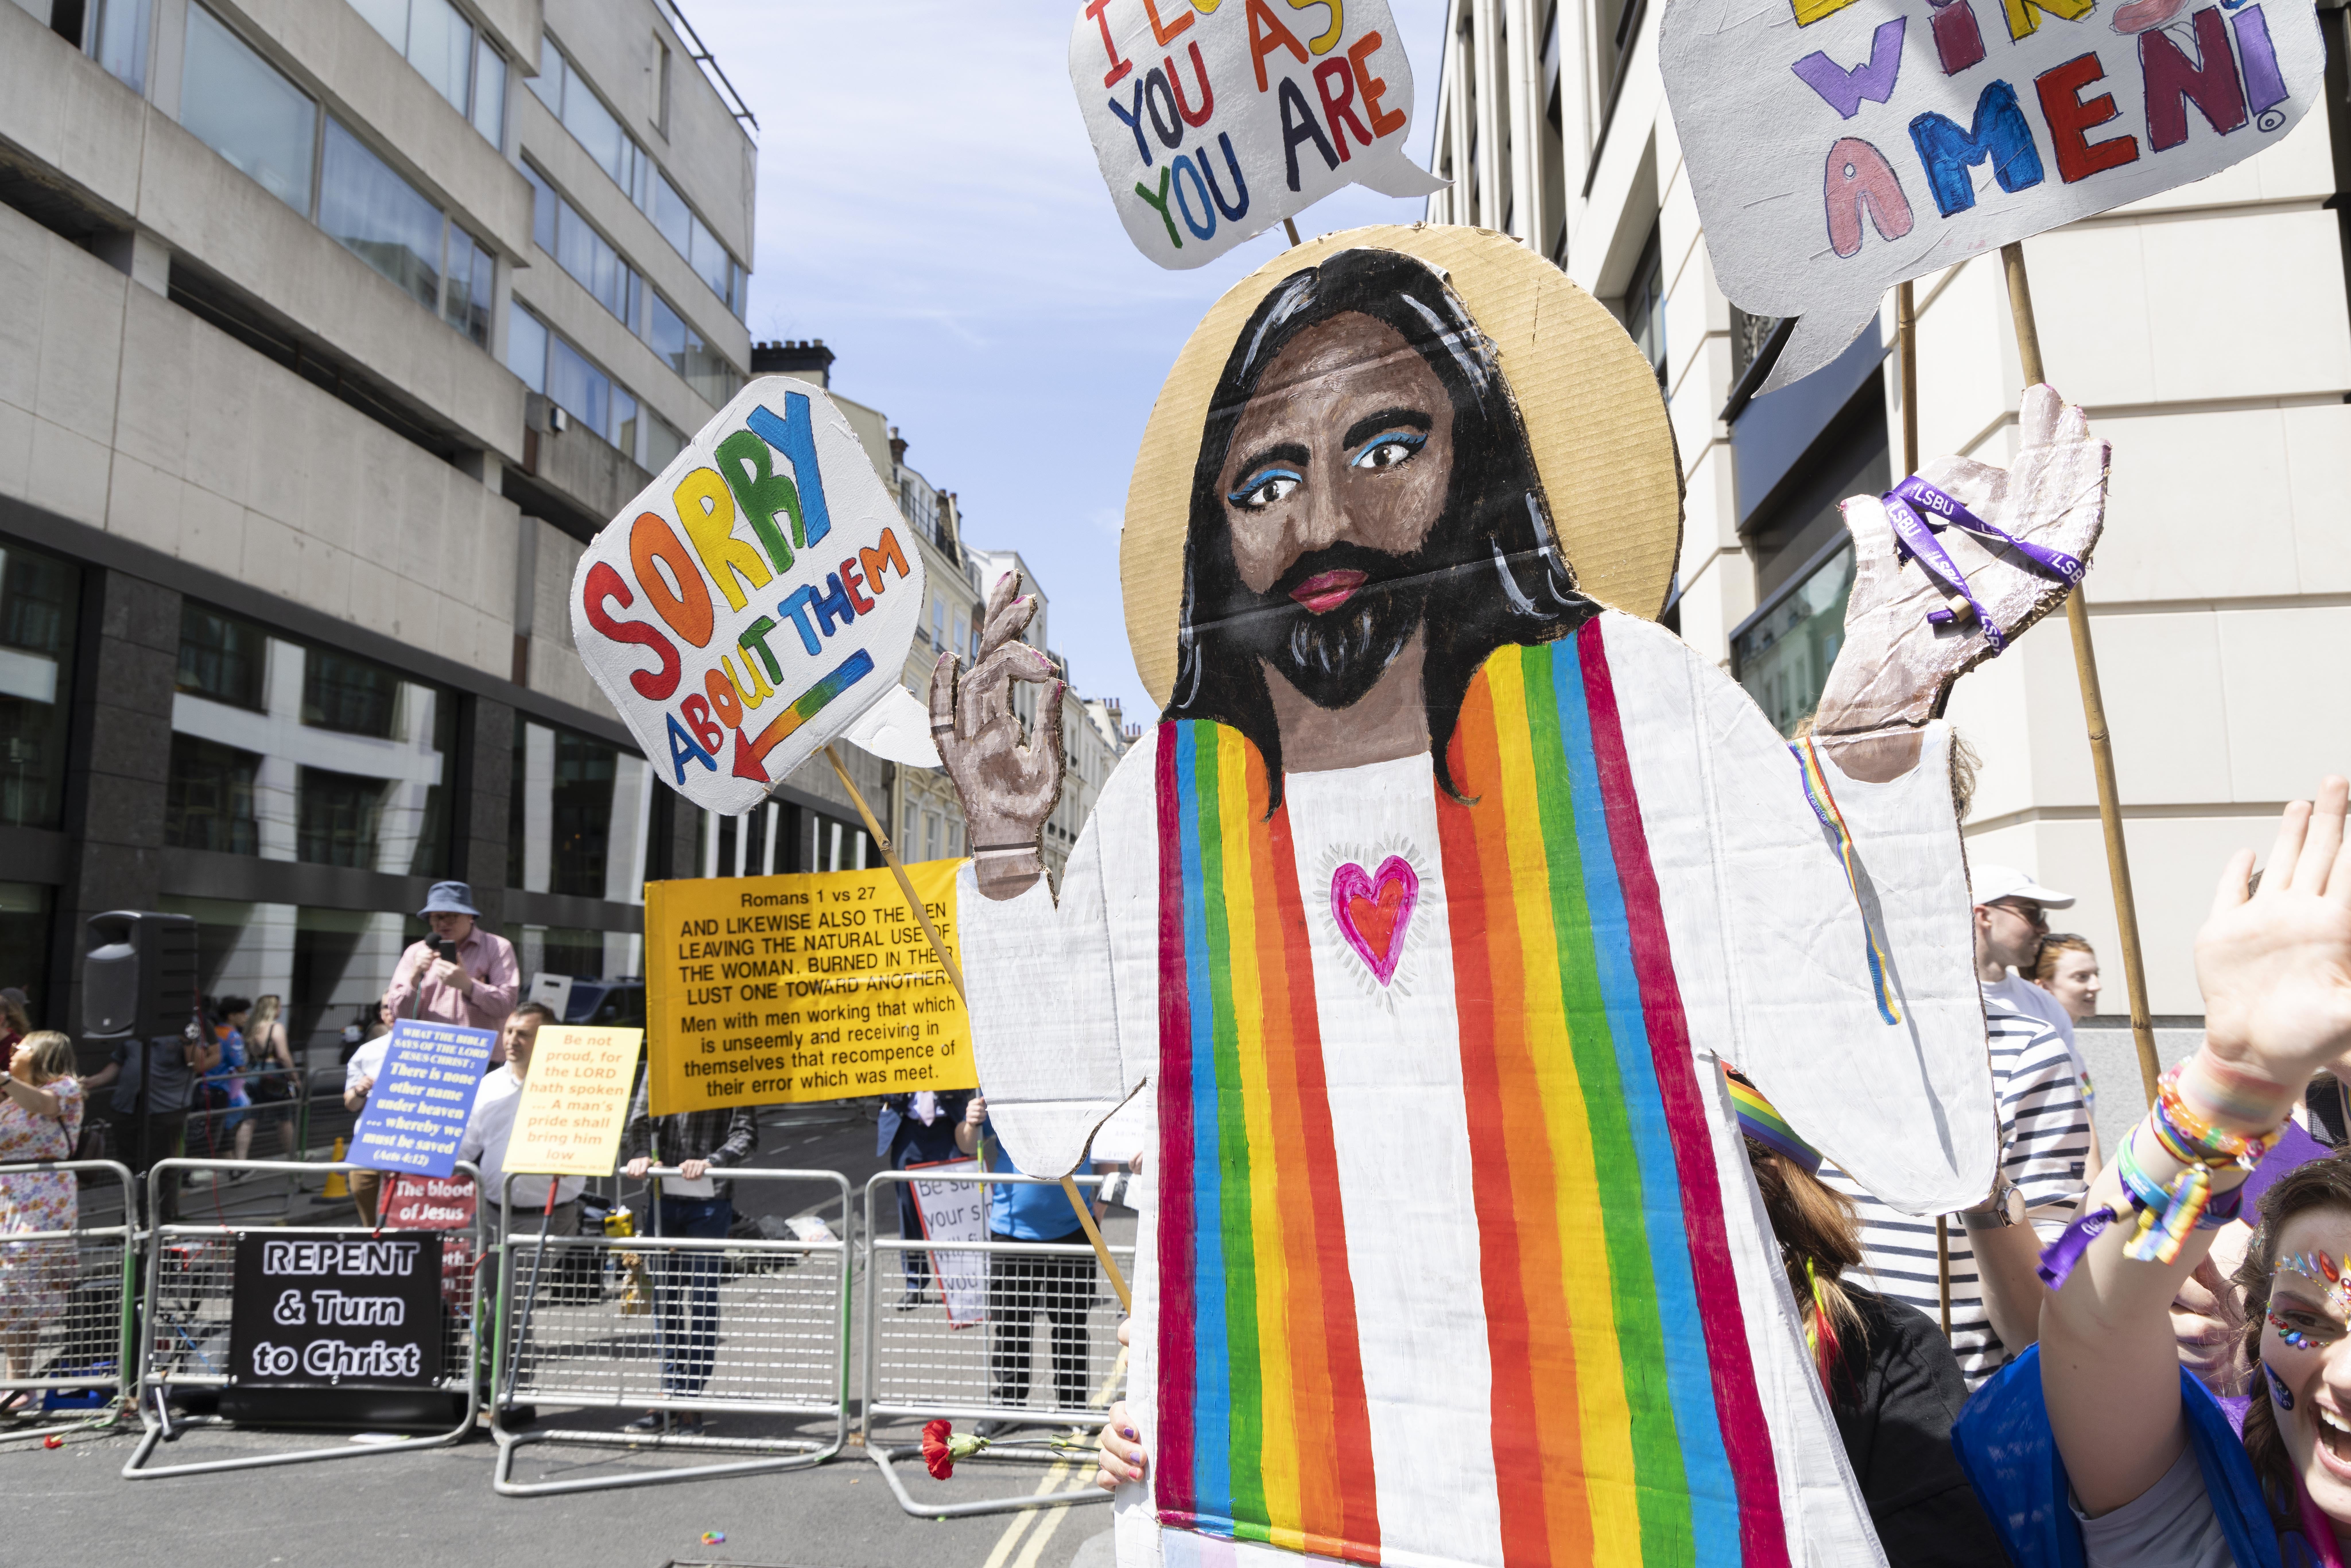 A cardboard figure of Jesus Christ holds a sign, ‘I’m sorry about them’, pointing toward Christian protesters